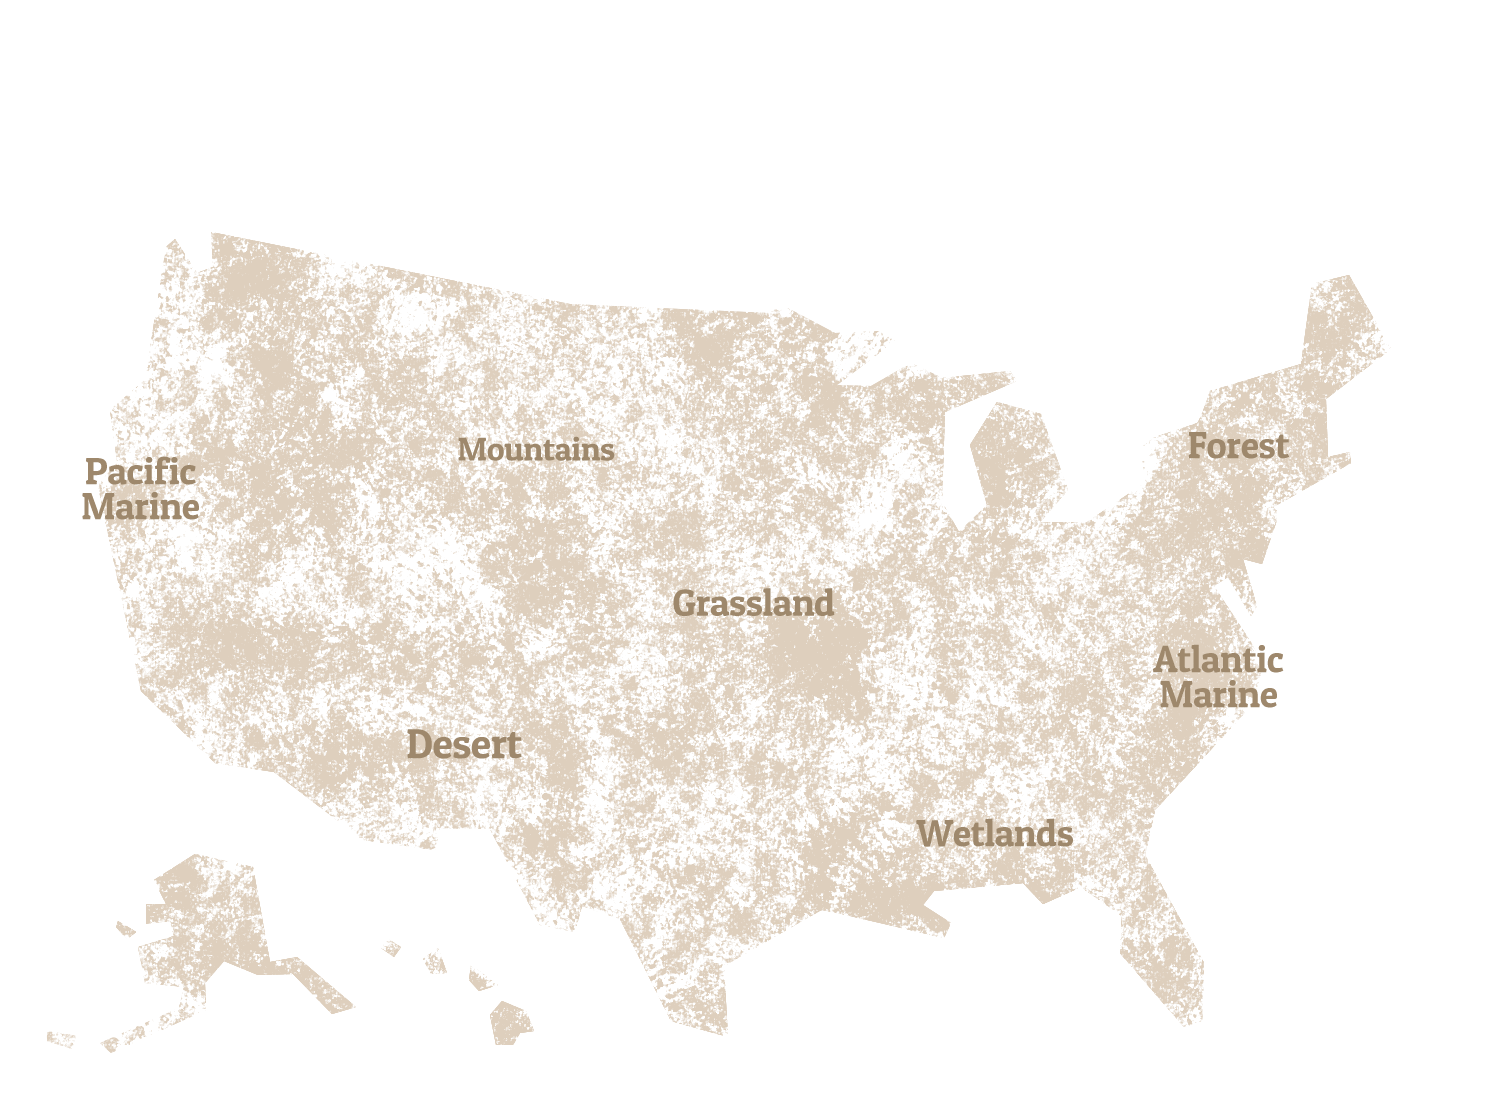 A graphic map of the United States, noting the Atlantic Marine, Forest, Wetlands, Grassland, Mountains, Desert, and Pacific Marine.